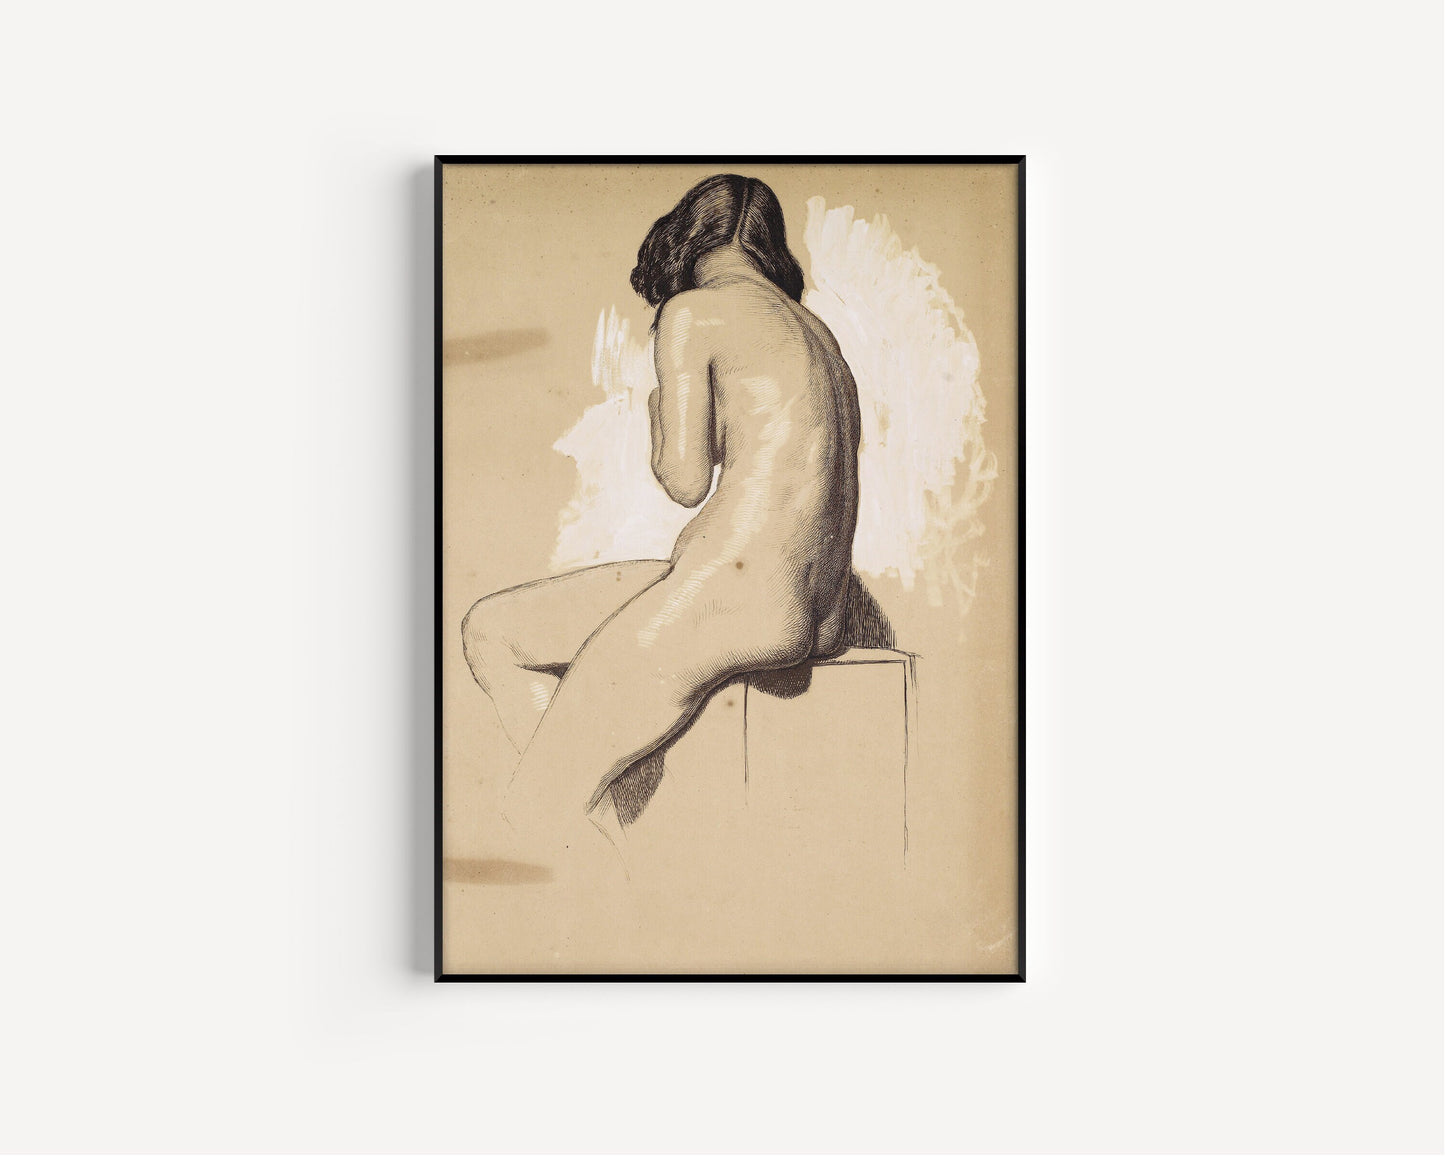 Holman Hunt Nude Sketch Fine Line Beige Art Poster Famous Painting Vintage Ready to hang Framed Home Office Decor Museum Print Gift Idea